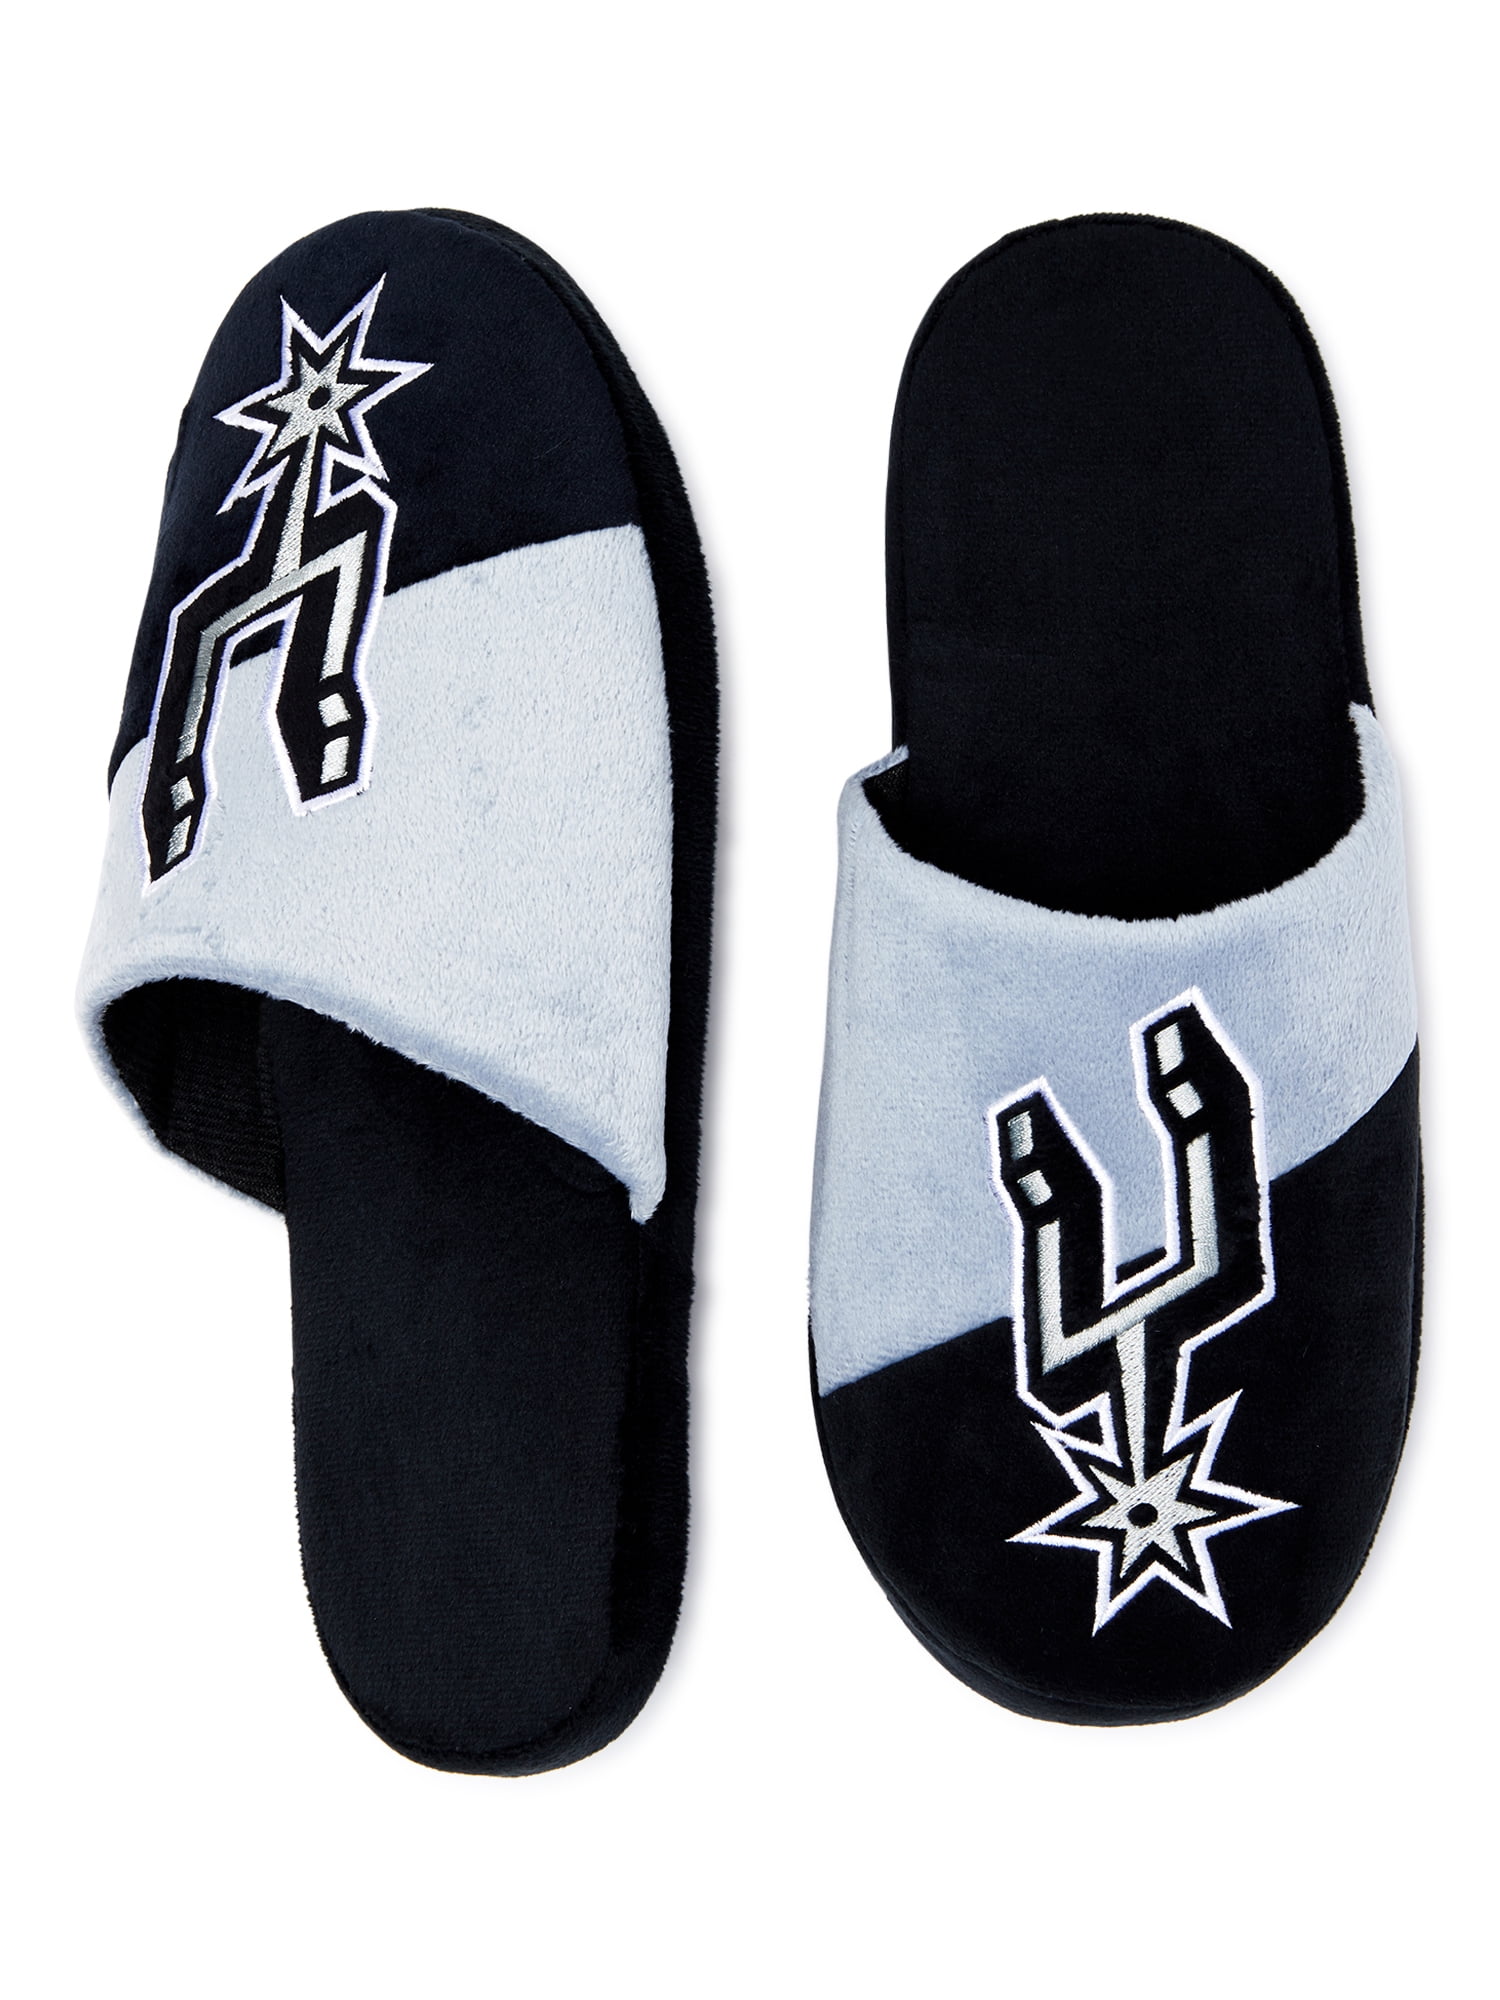 spurs slippers